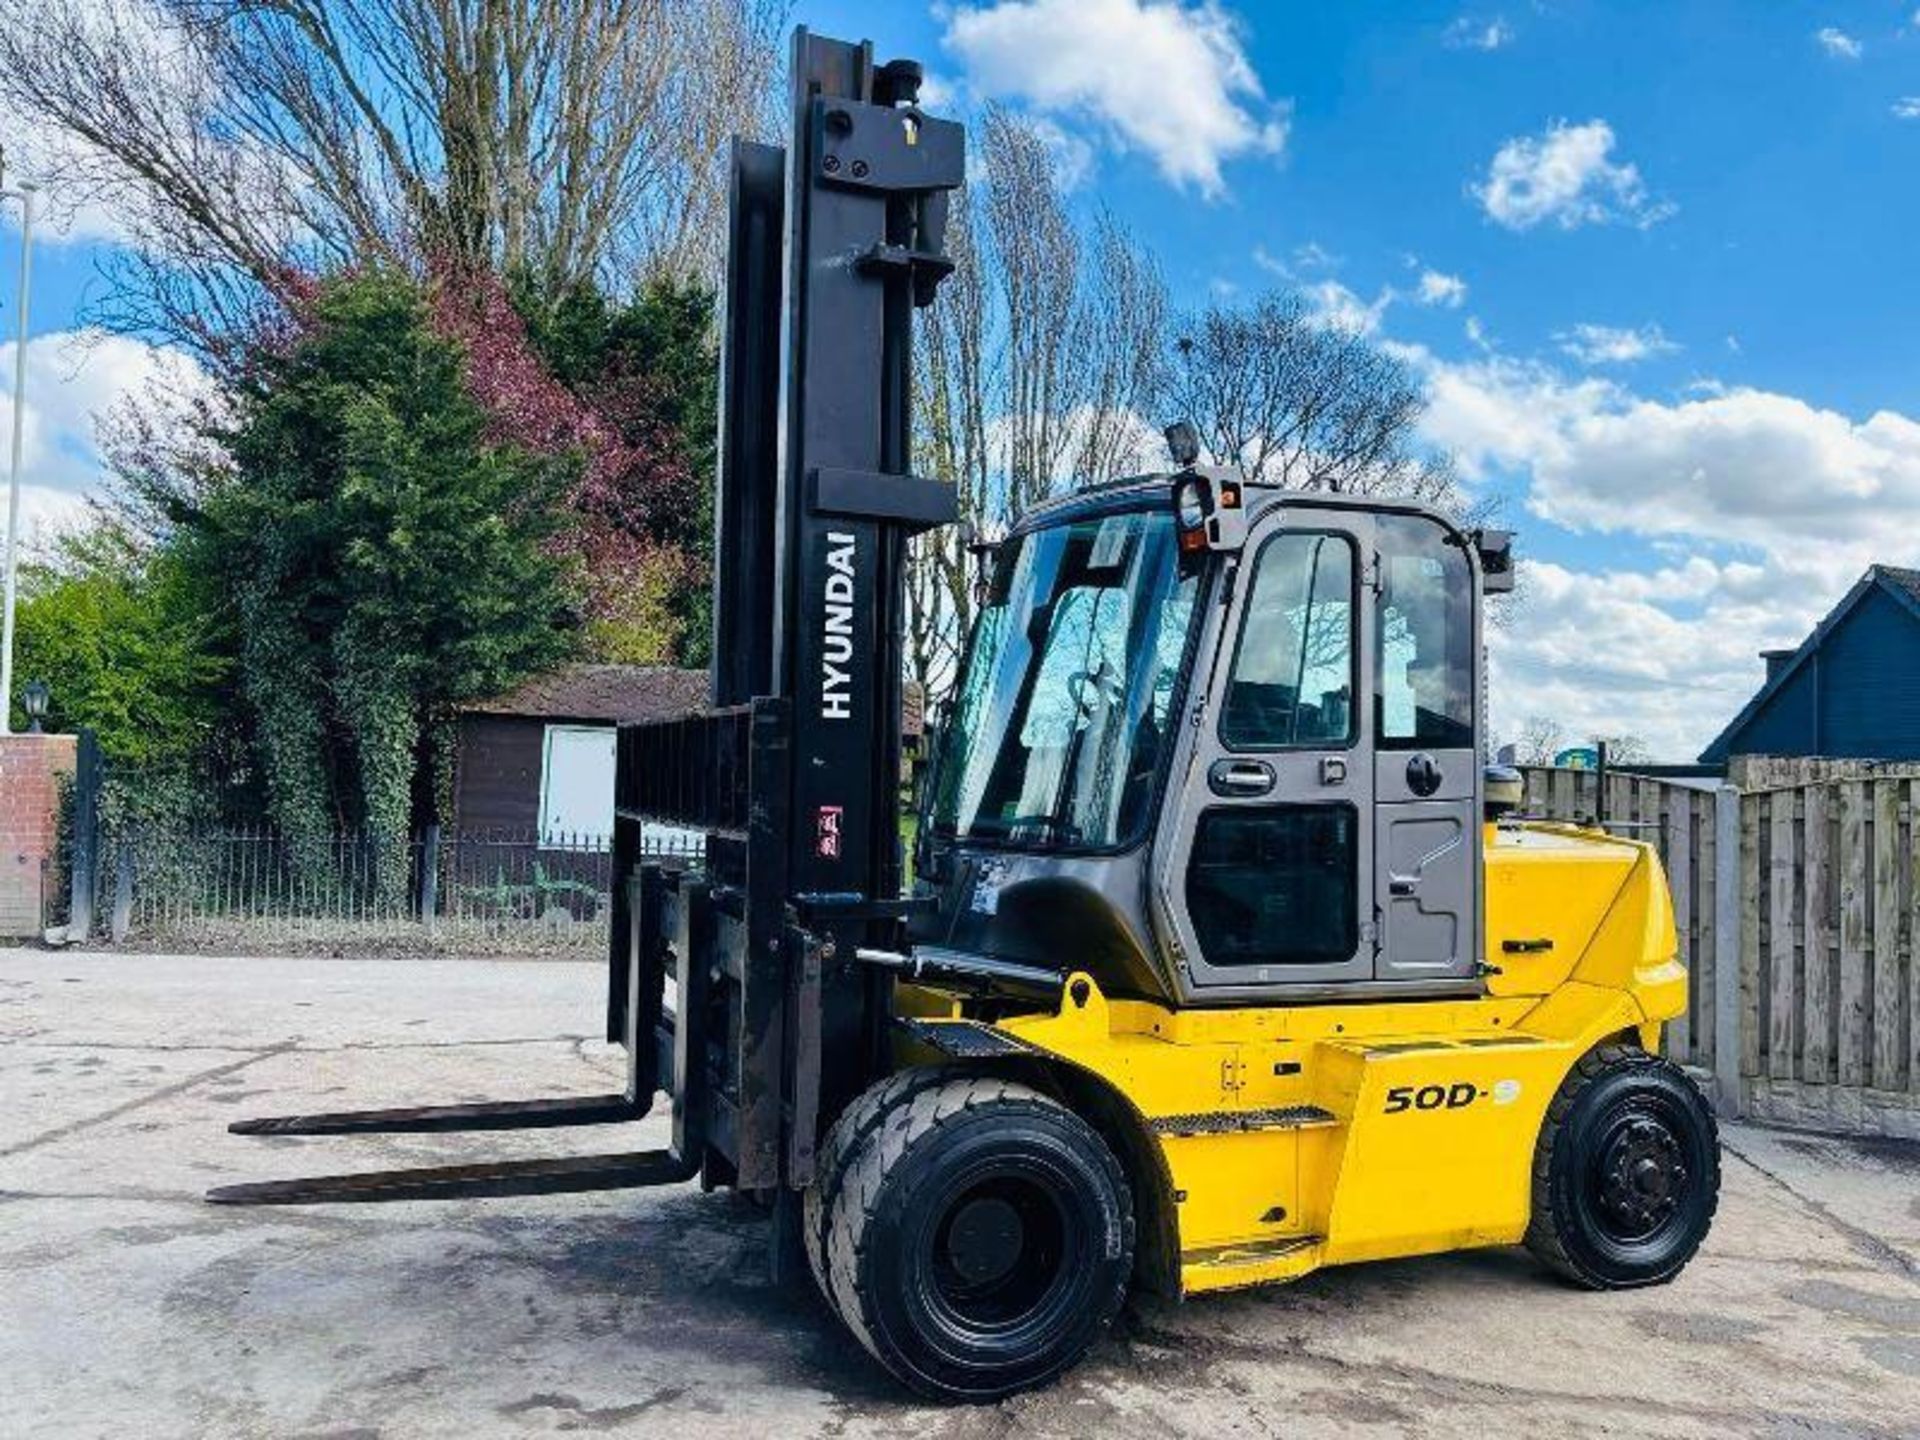 HYUNDAI 50D-9 DIESEL FORKLIFT *YEAR 2016, 5 TON LIFT* C/W SIDE SHIFT - Image 15 of 17